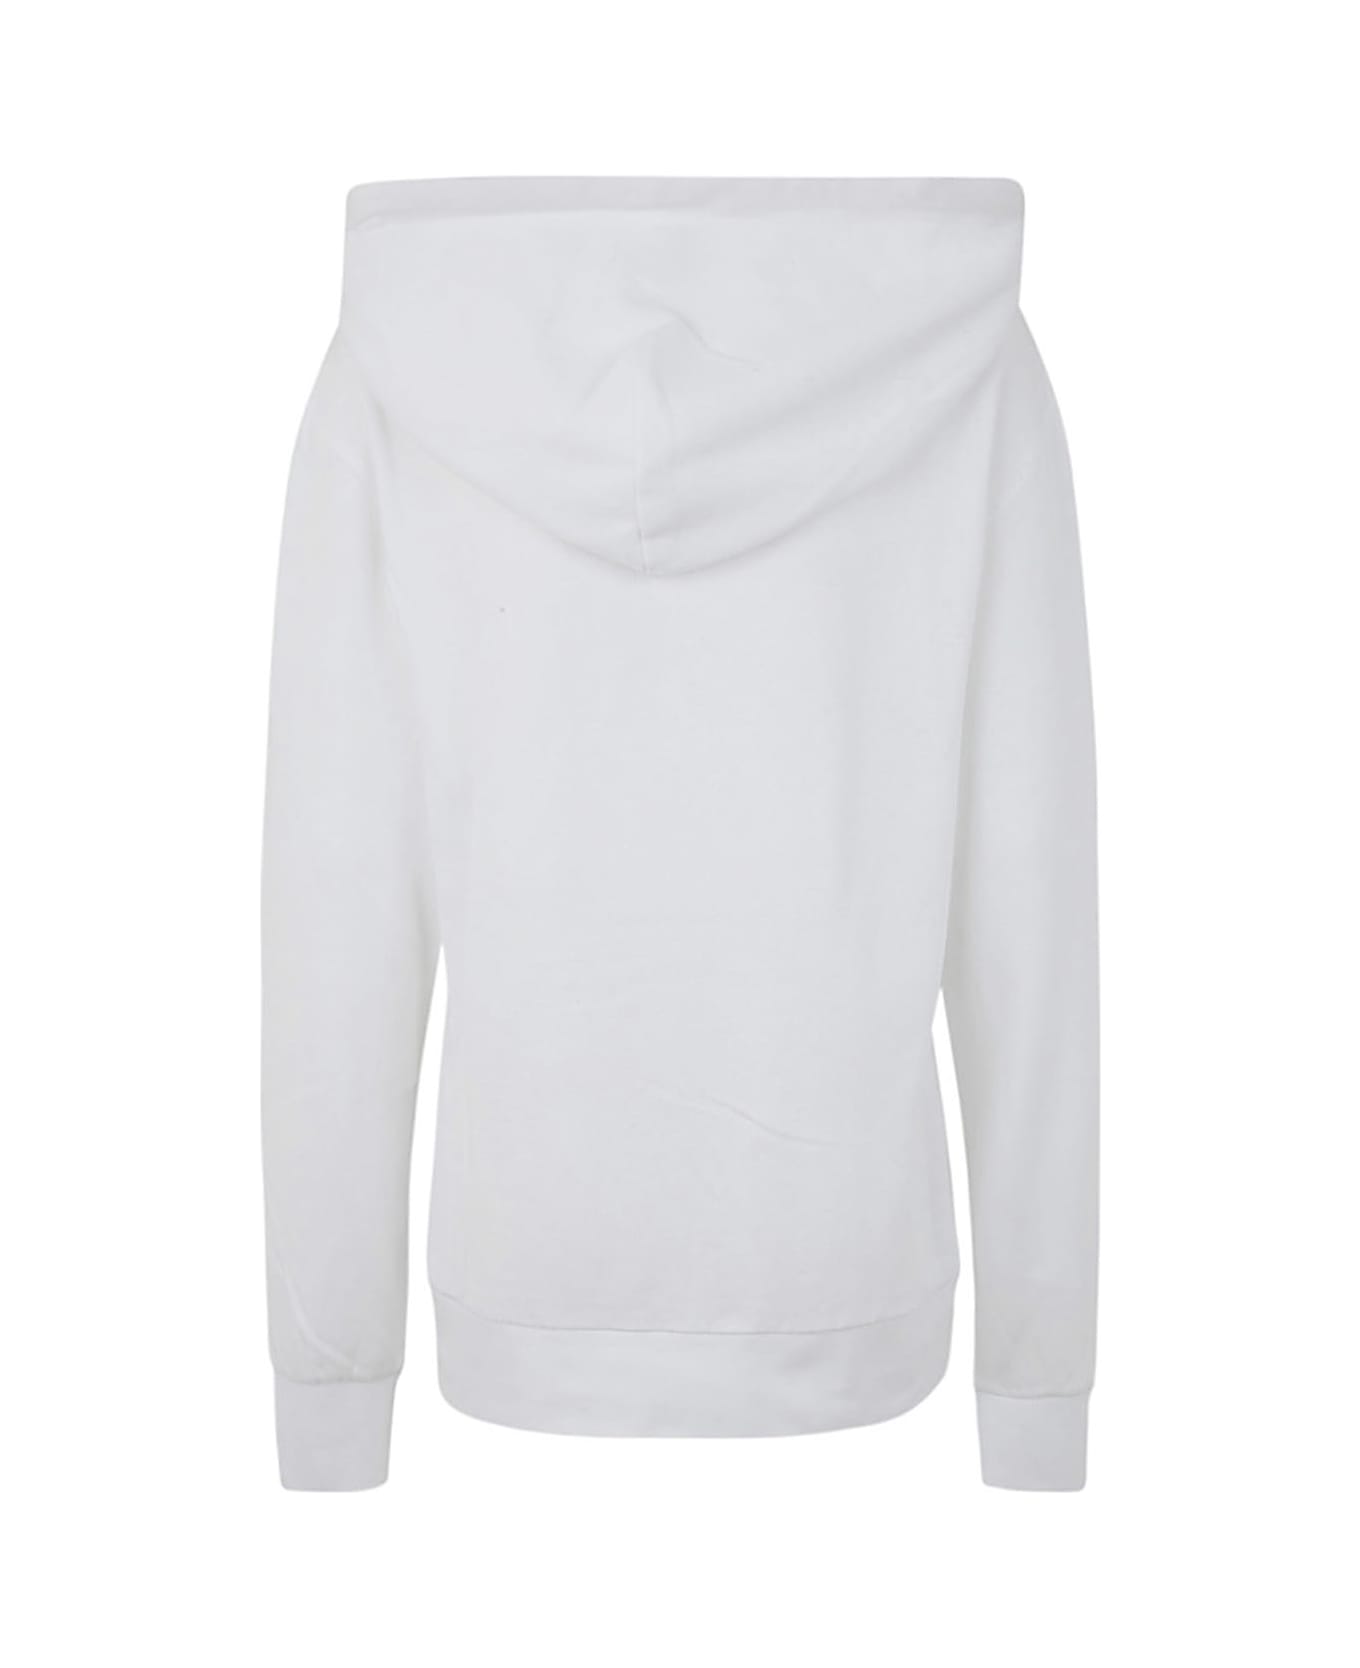 J.W. Anderson Anchor Embroidery Hoodie - White